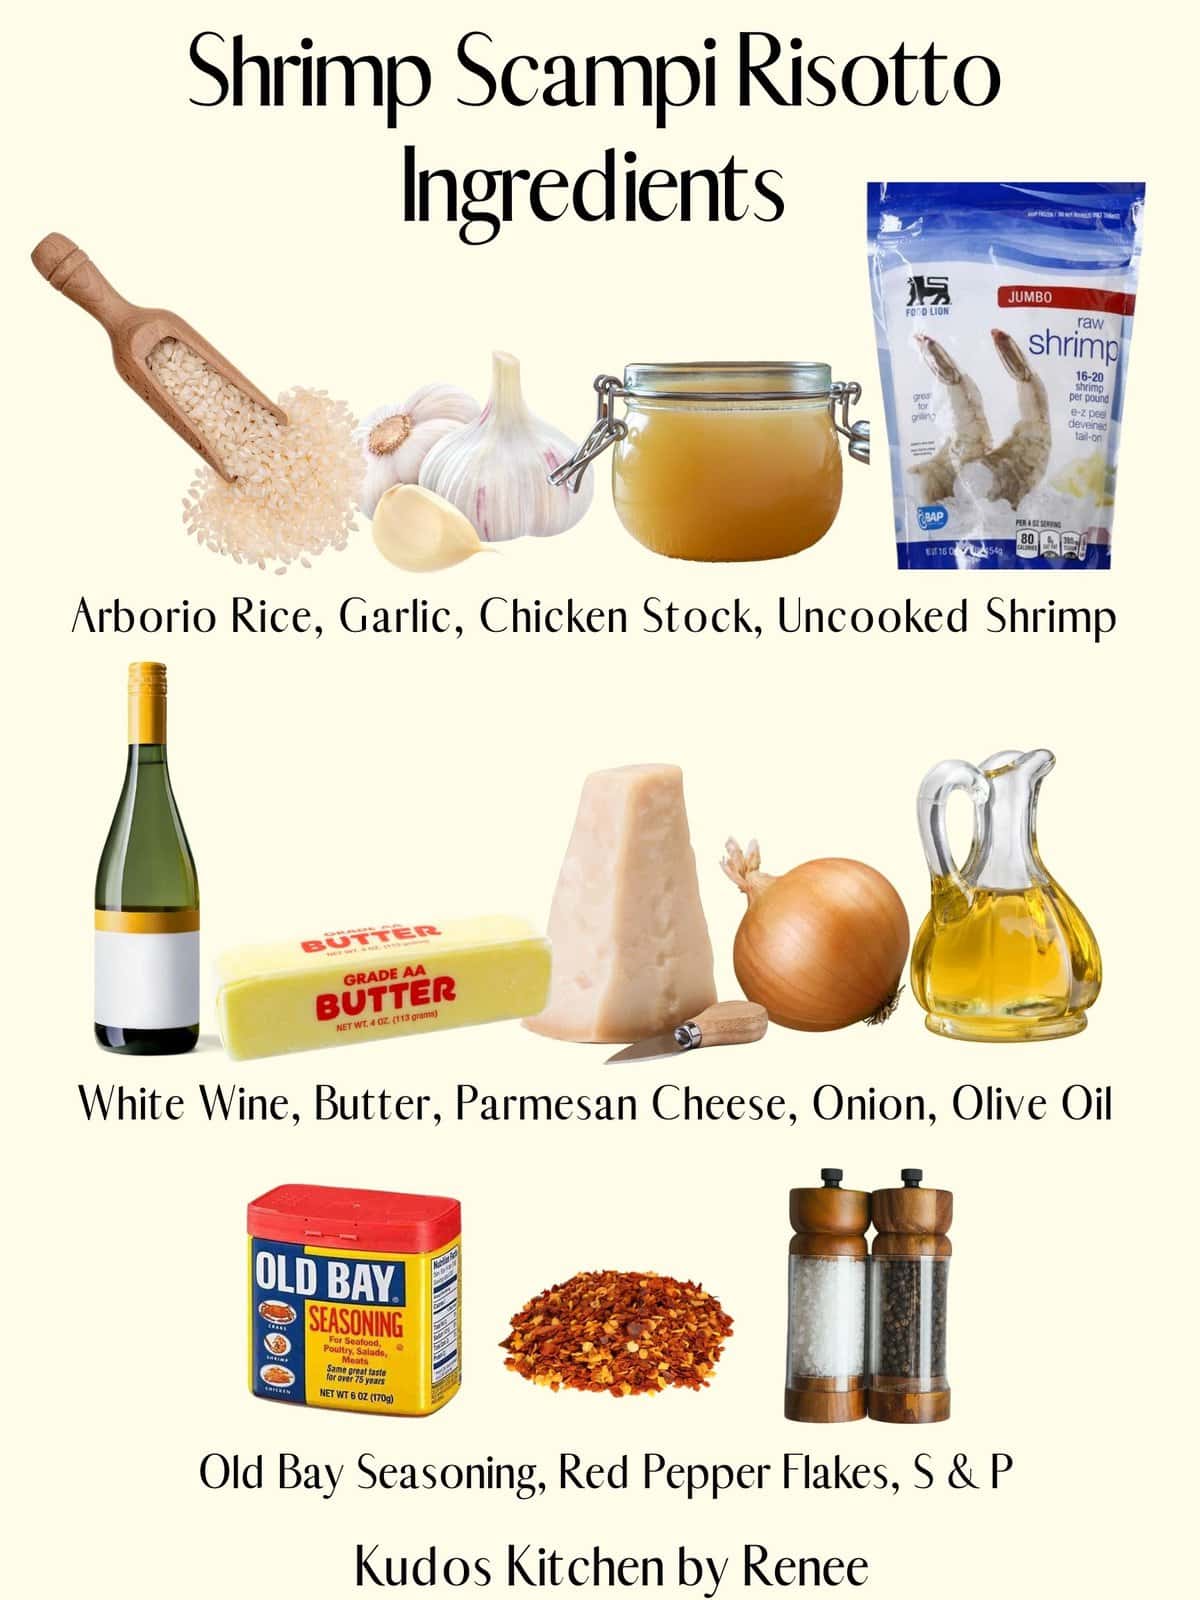 A visual ingredient list for making Shrimp Scampi Risotto.